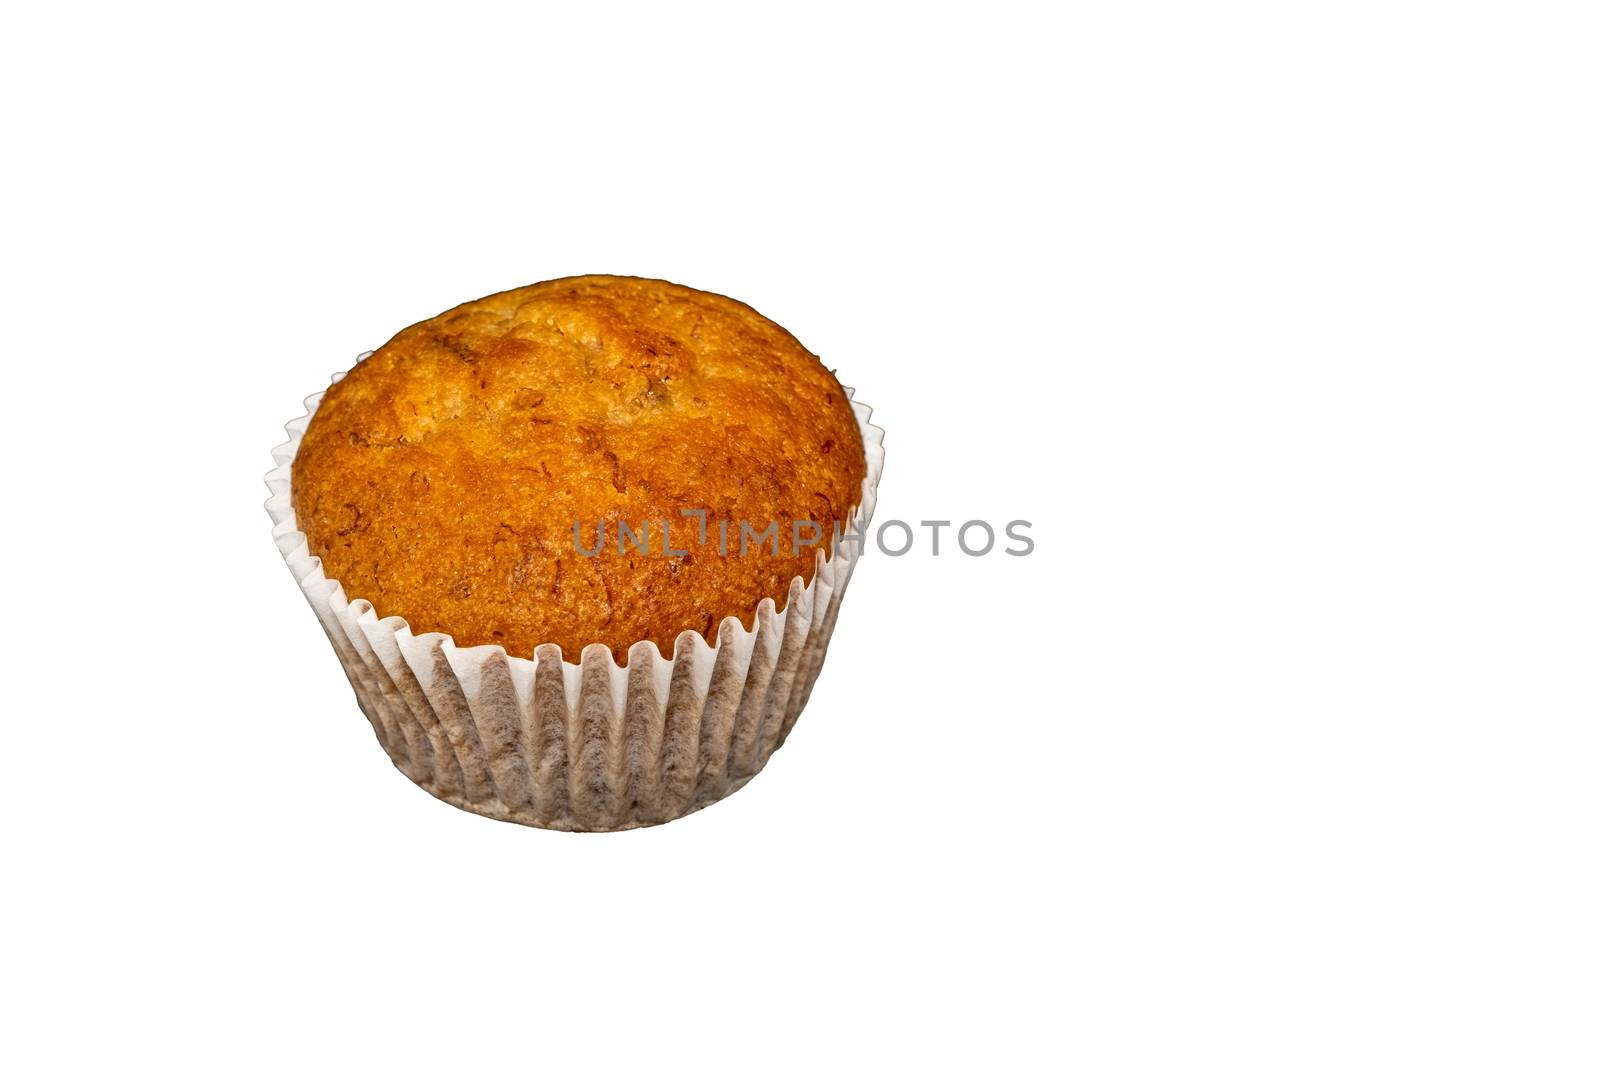 A Homemade healthy banana bread or cake for breakfast isolate on white background